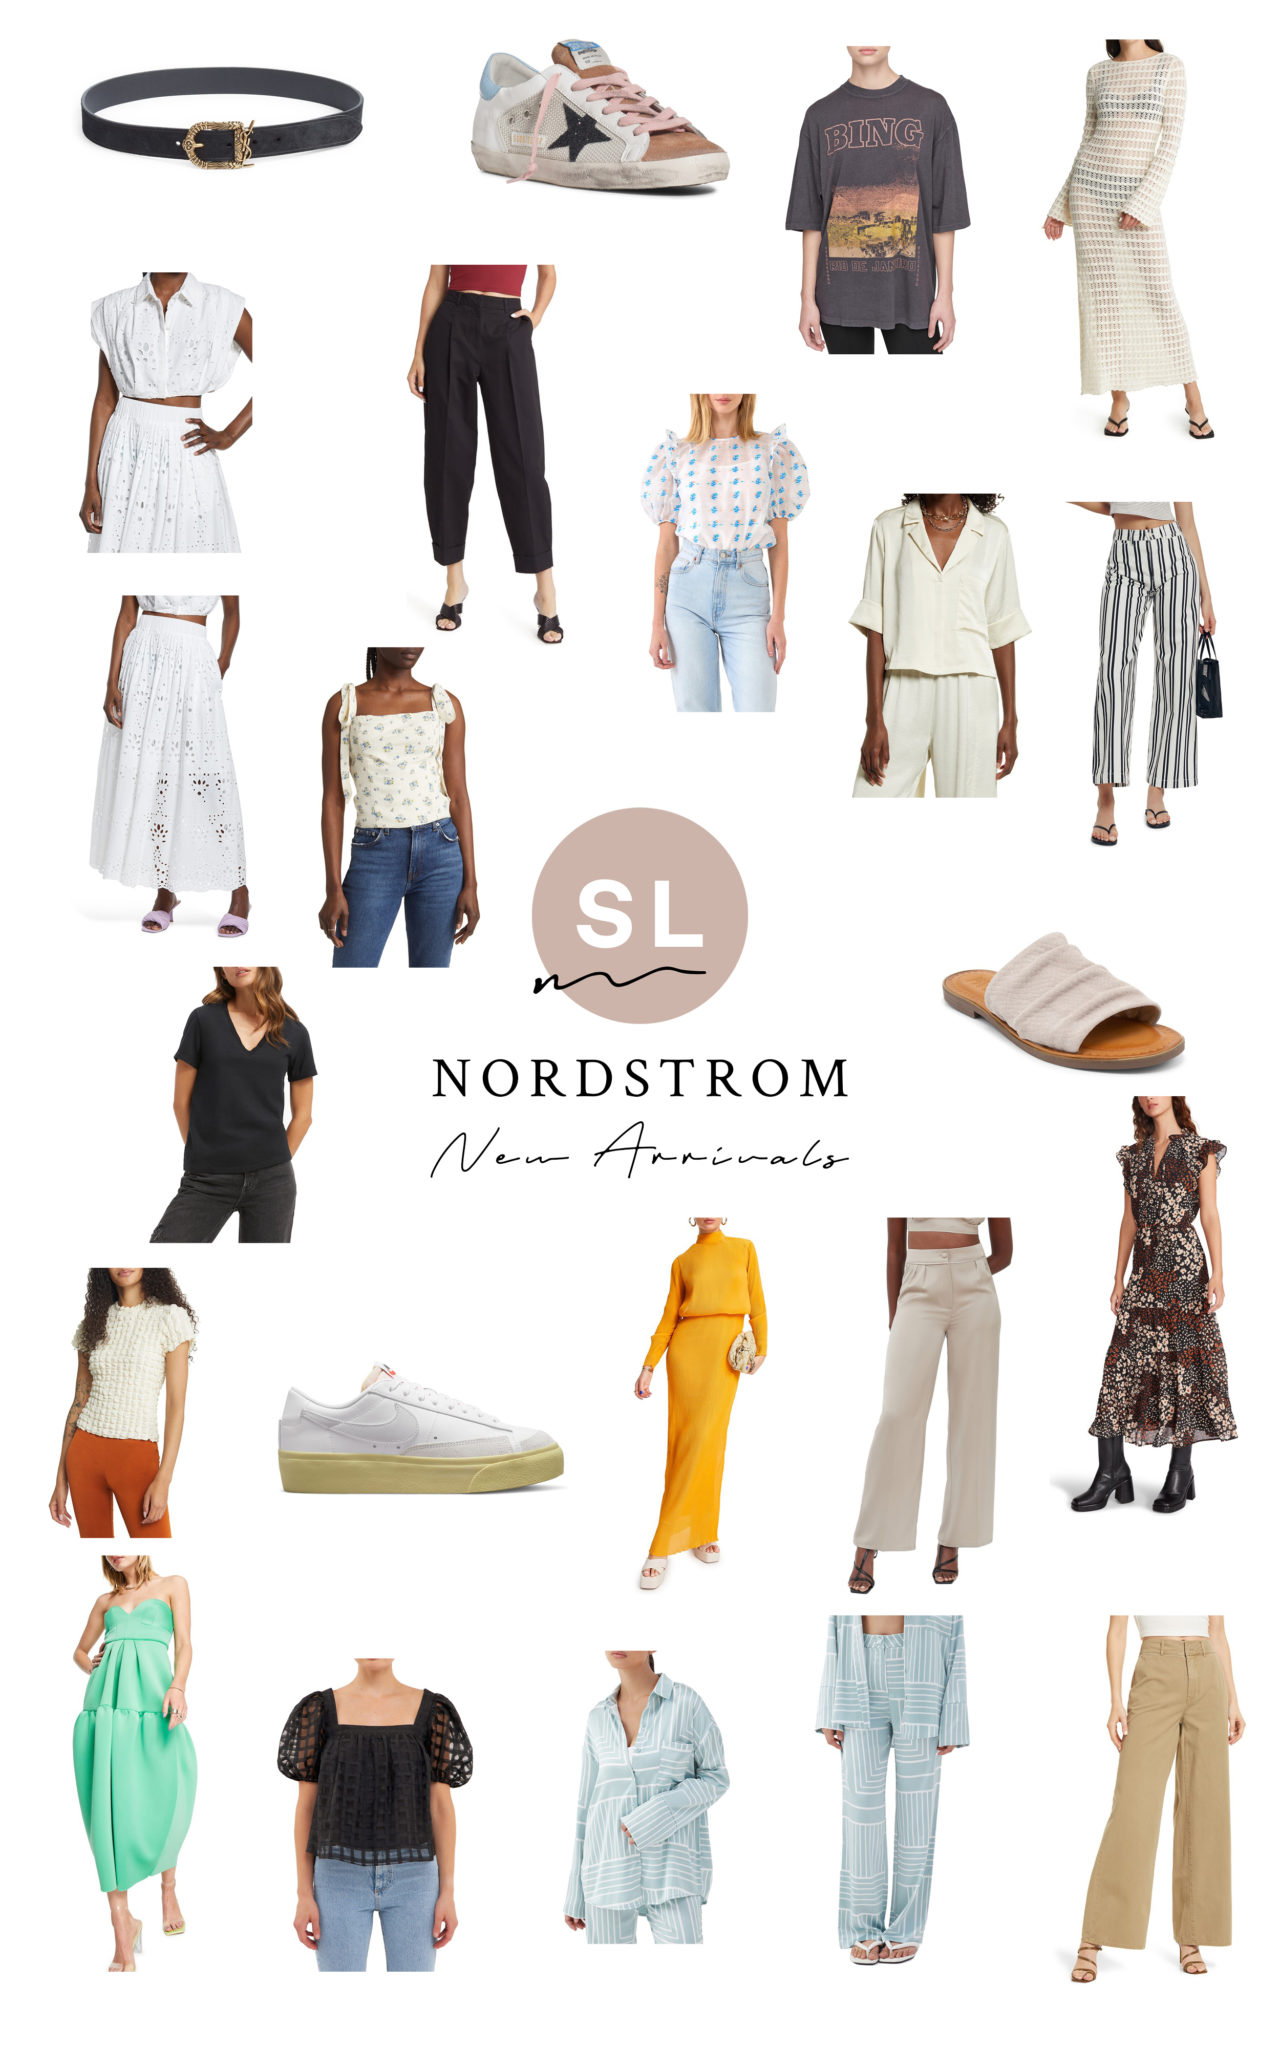 August Nordstrom New Arrivals